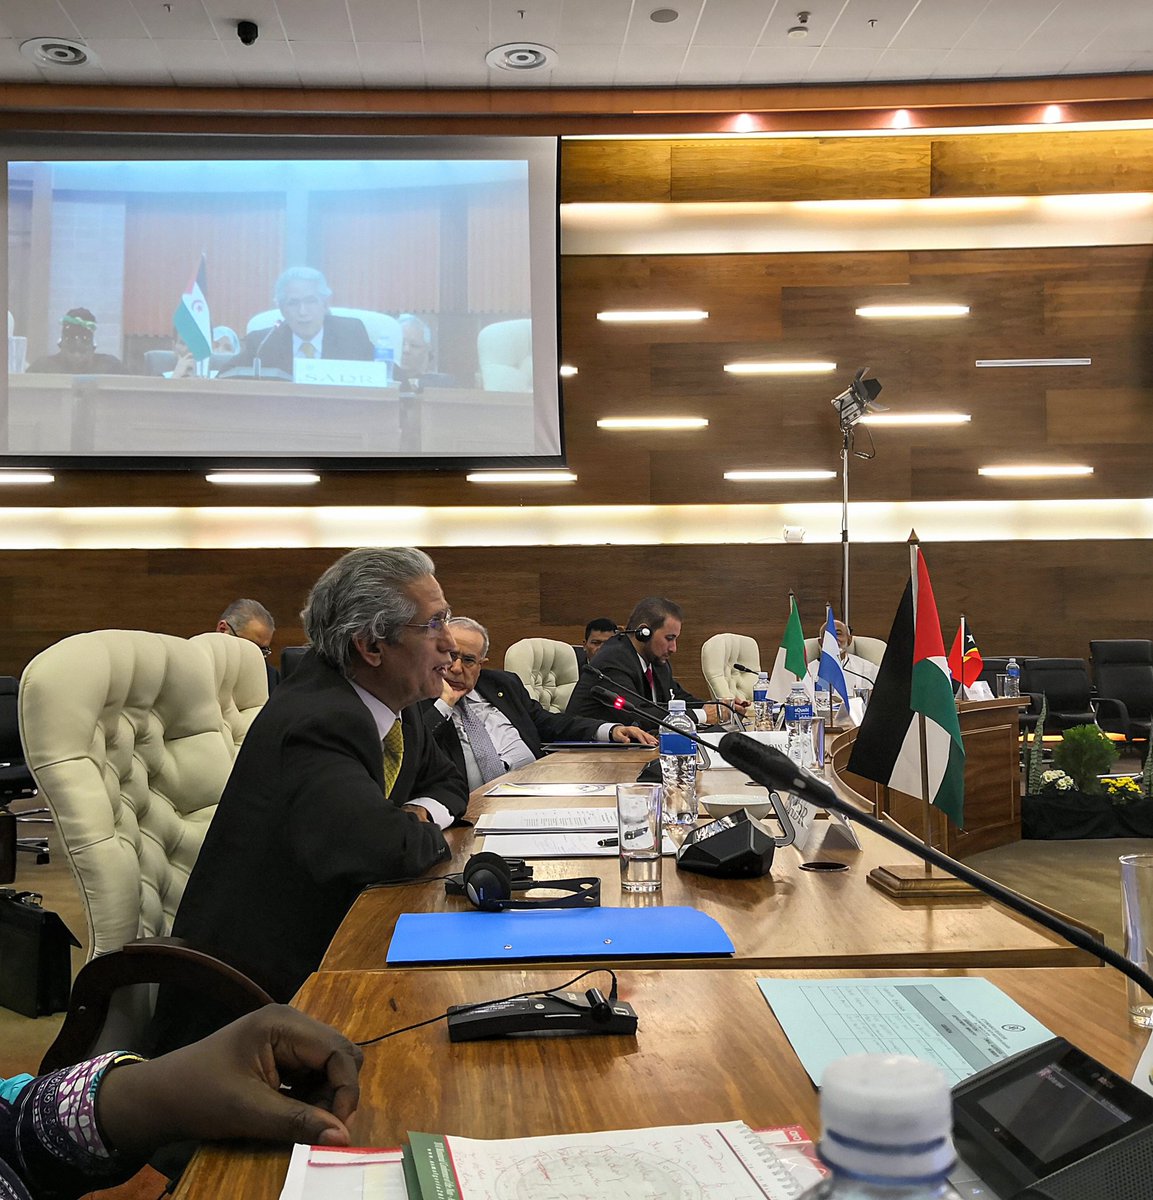 SADR Foreign Minister Salek addressing #SADCSaharawiSolidarity - role of the #EU in the illegal exploitation of #westernsahara natural resources is unacceptable; their own courts have made illegality clear, & their actions threatens to undermine UN Peace Process #SADC